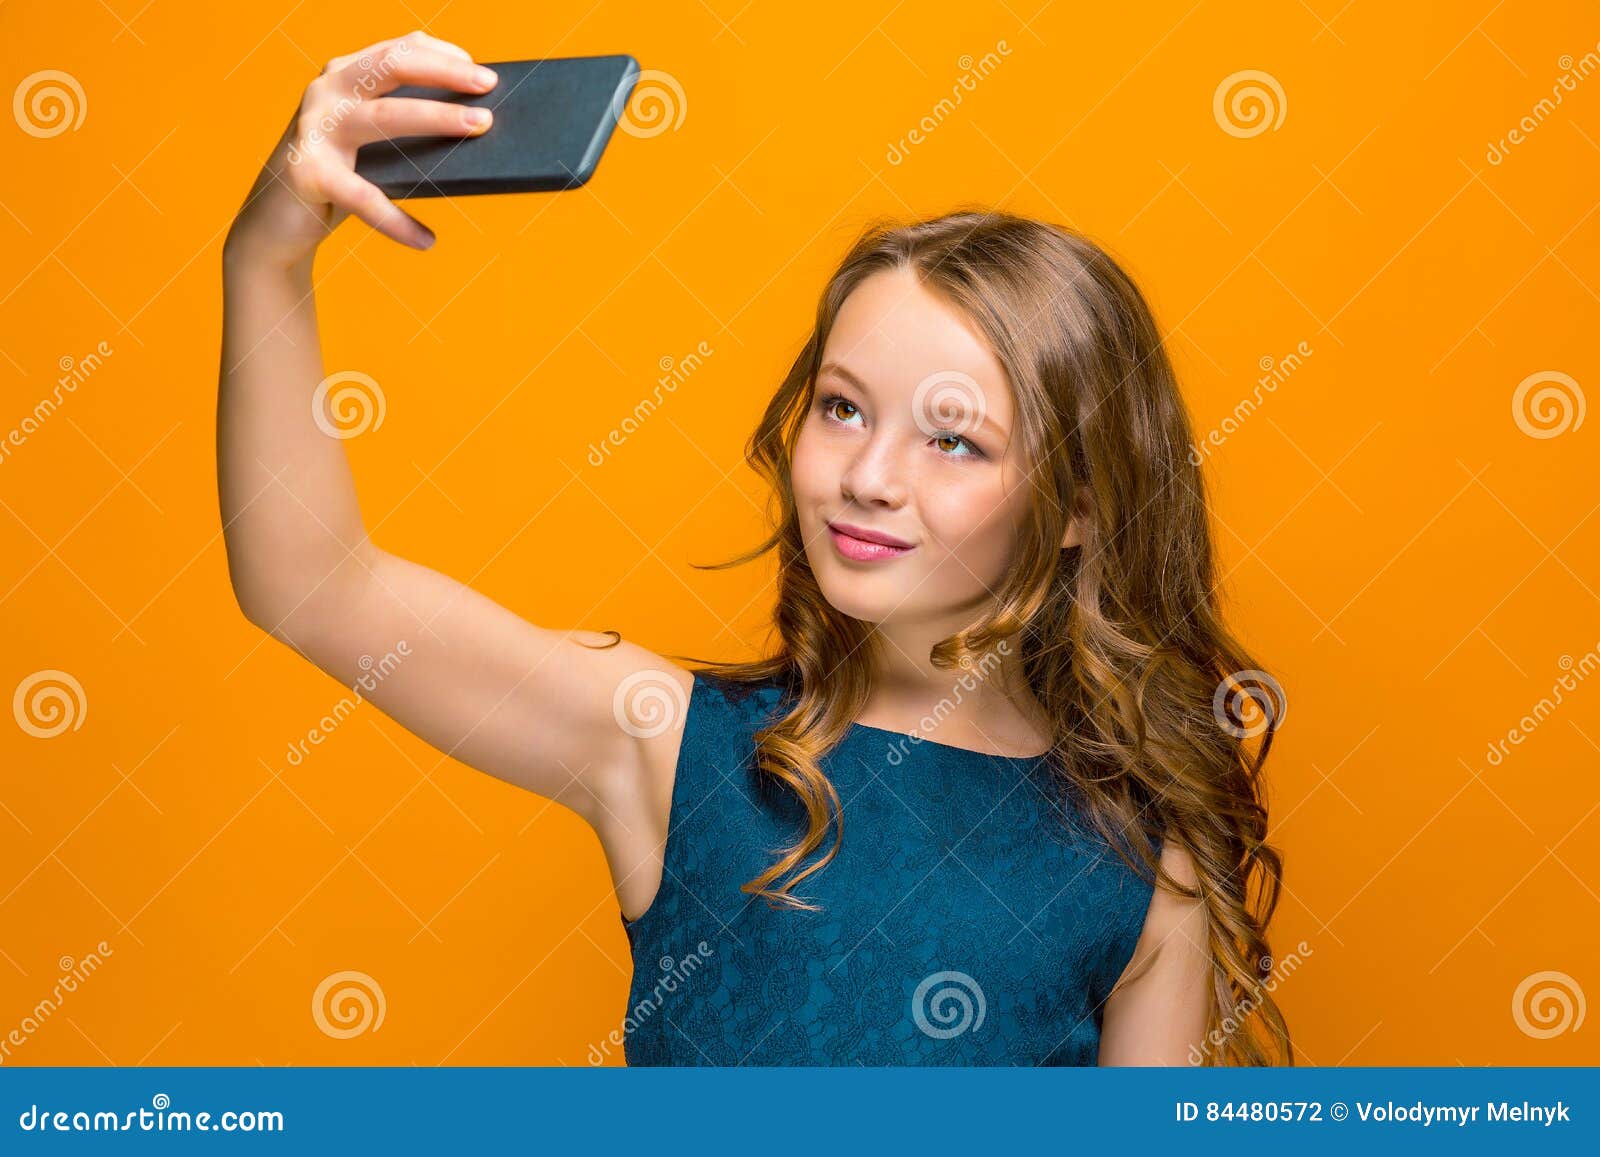 The Face of Playful Happy Teen Girl with Phone Stock Photo - Image of ...